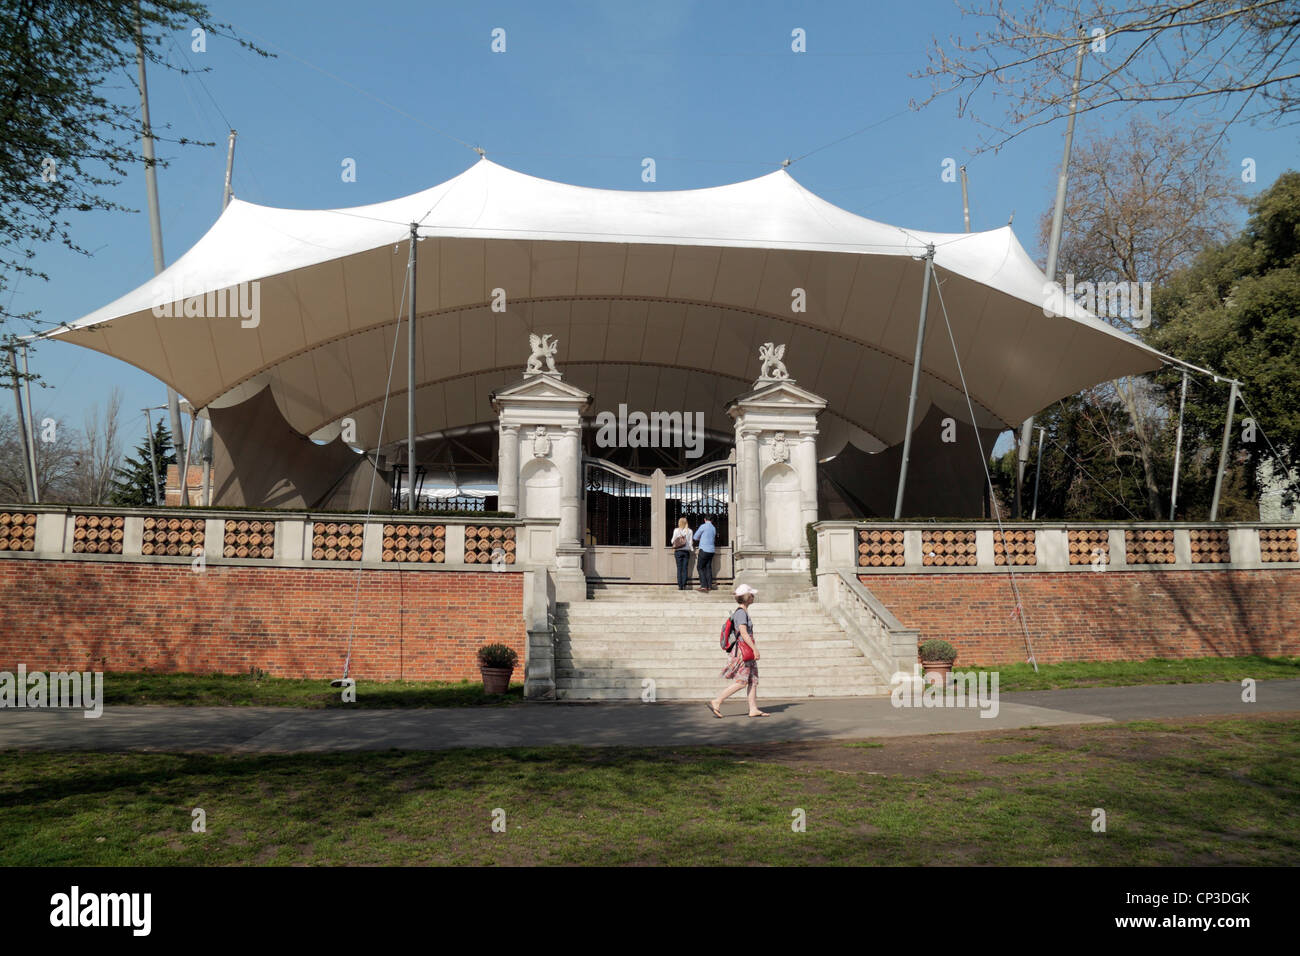 The open air Holland Park Theatre, home of the Opera Holland Park, in Holland Park, London, UK. Stock Photo